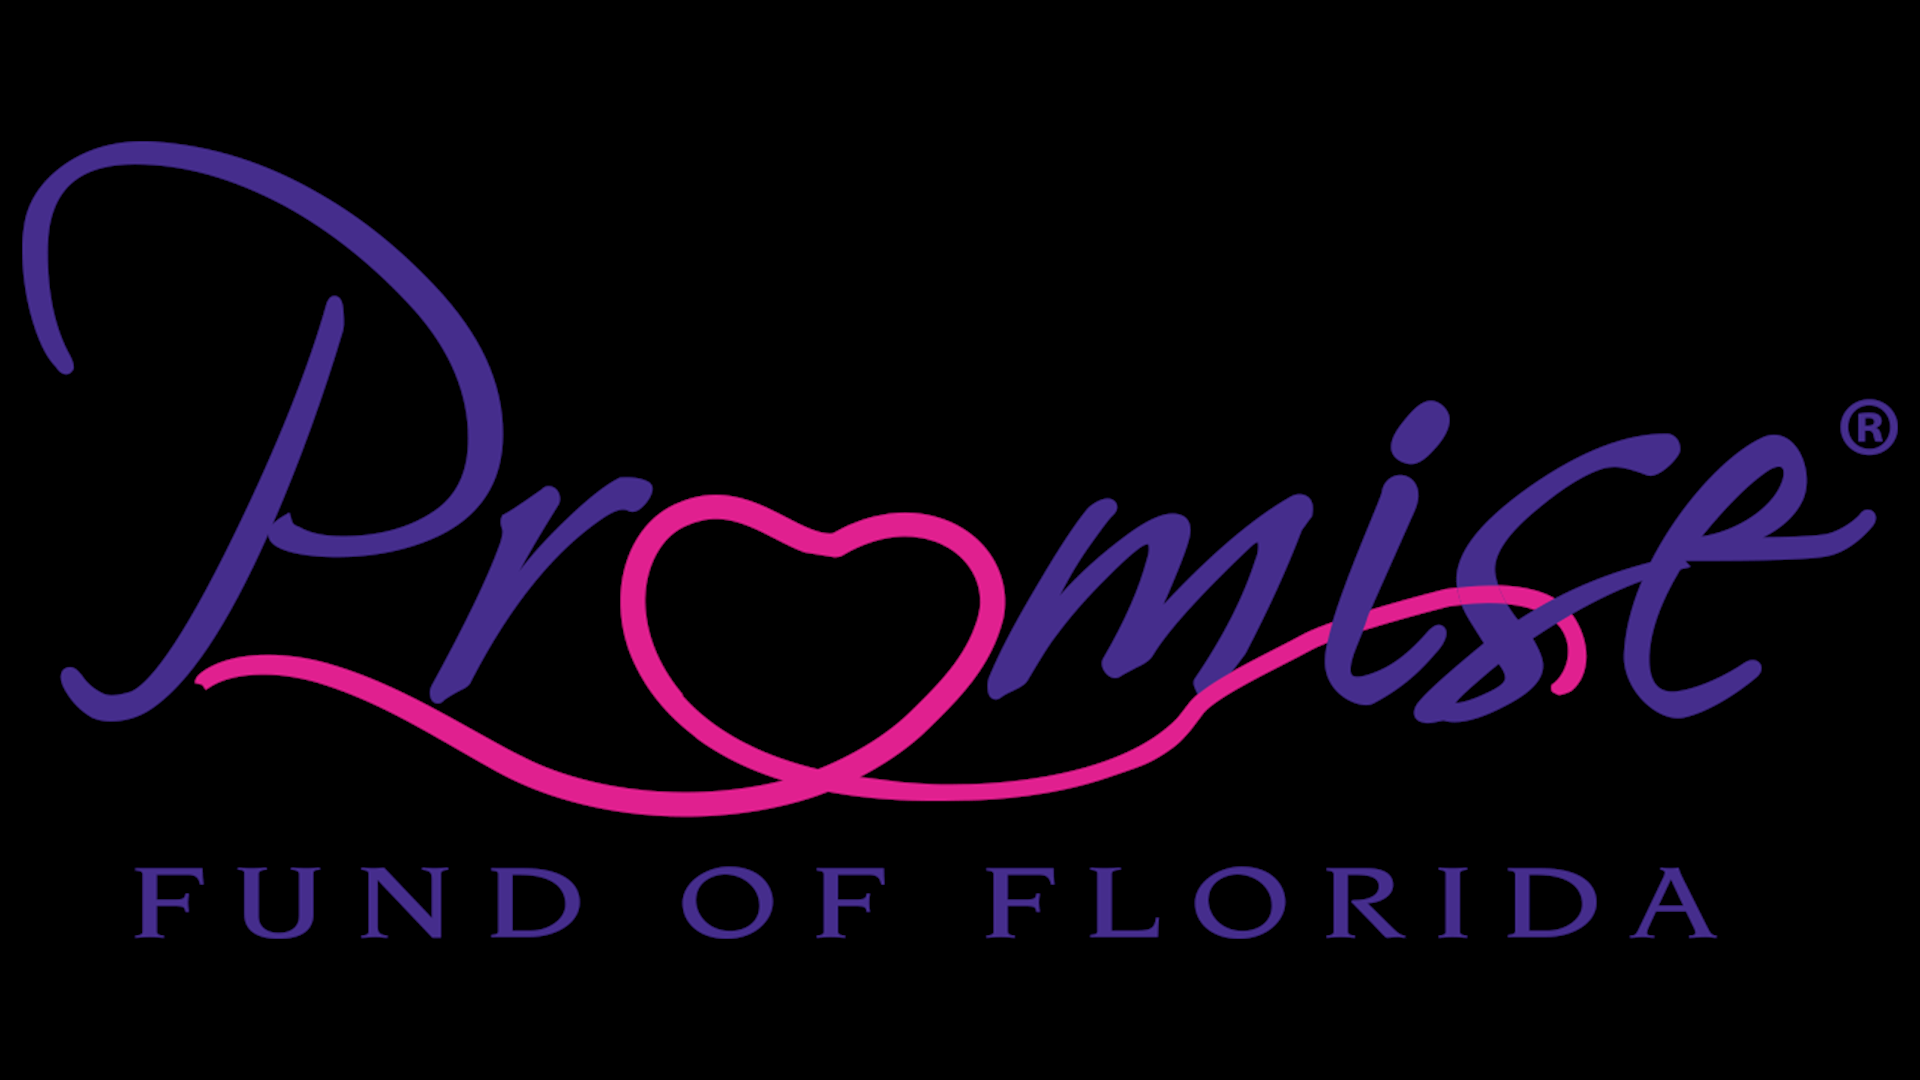 Nancy Brinker, founder of the Susan G. Komen Foundation, talks about the mission of her organization, The Promise Fund of Florida, the remove barriers to treatment